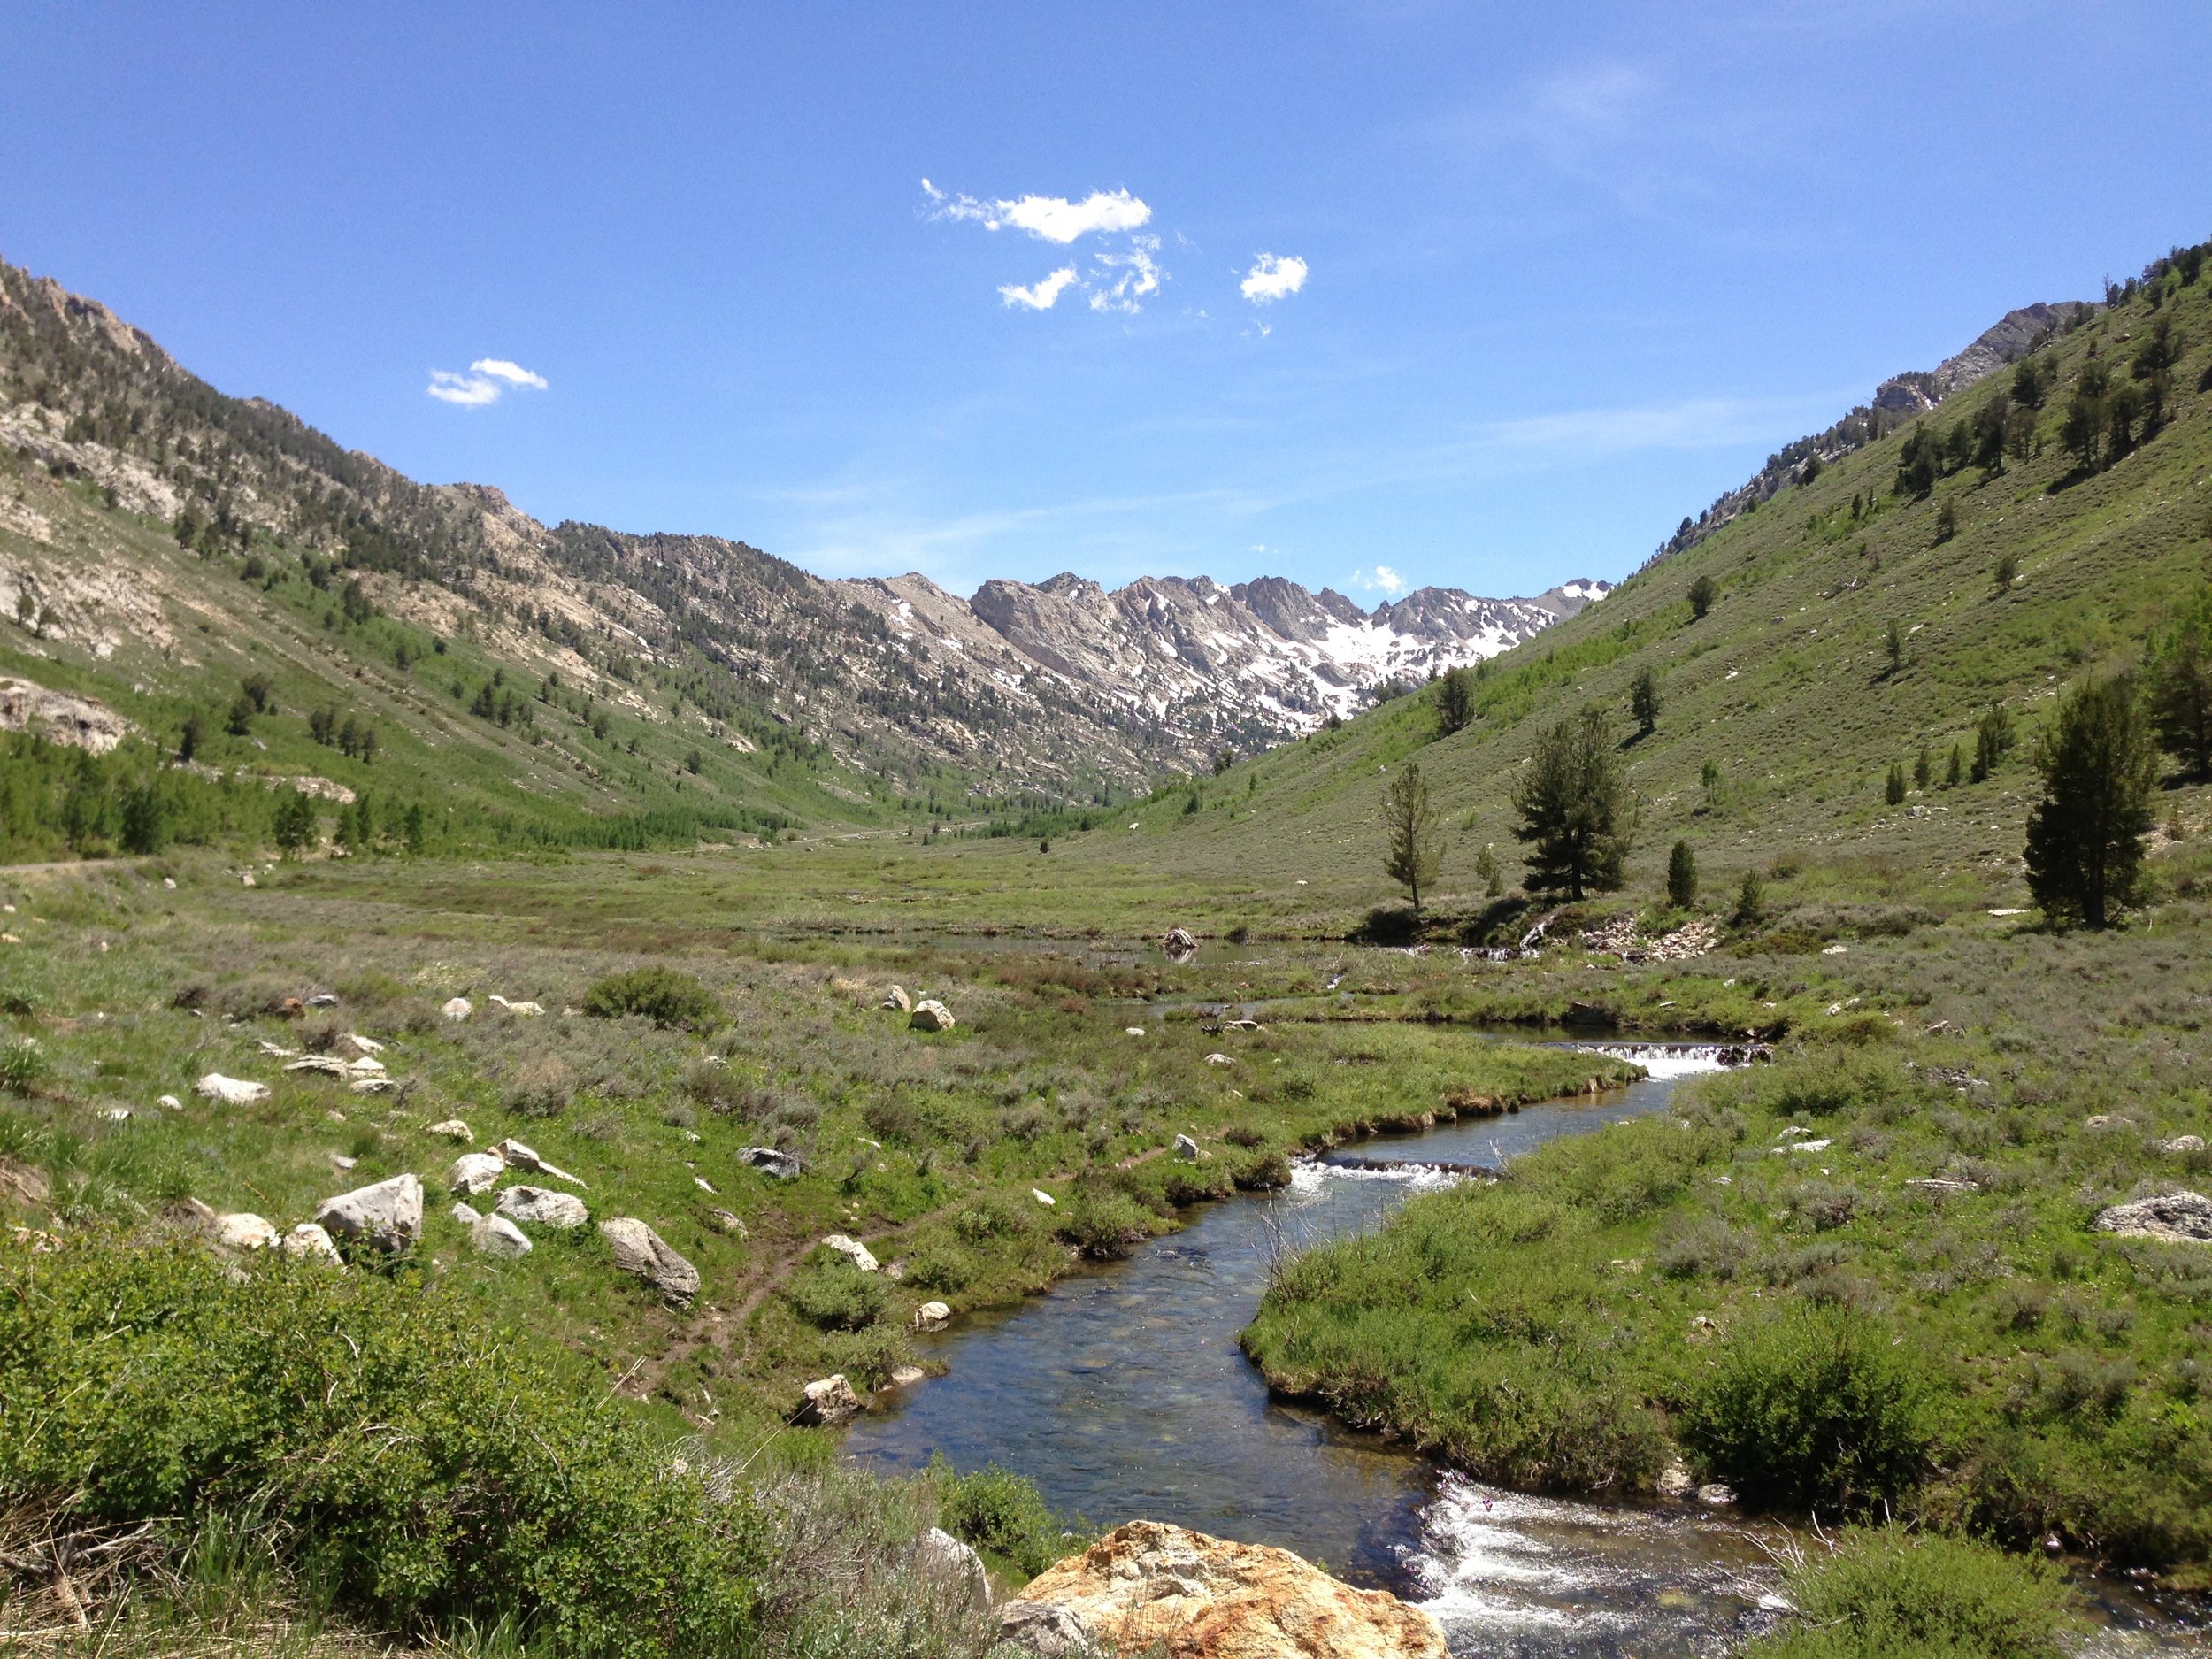 2014-06-23_14_18_53_View_up_Lamoille_Creek_from_the_Terraces_Picnic_Site_in_Lamoille_Canyon,_Nevada.jpg